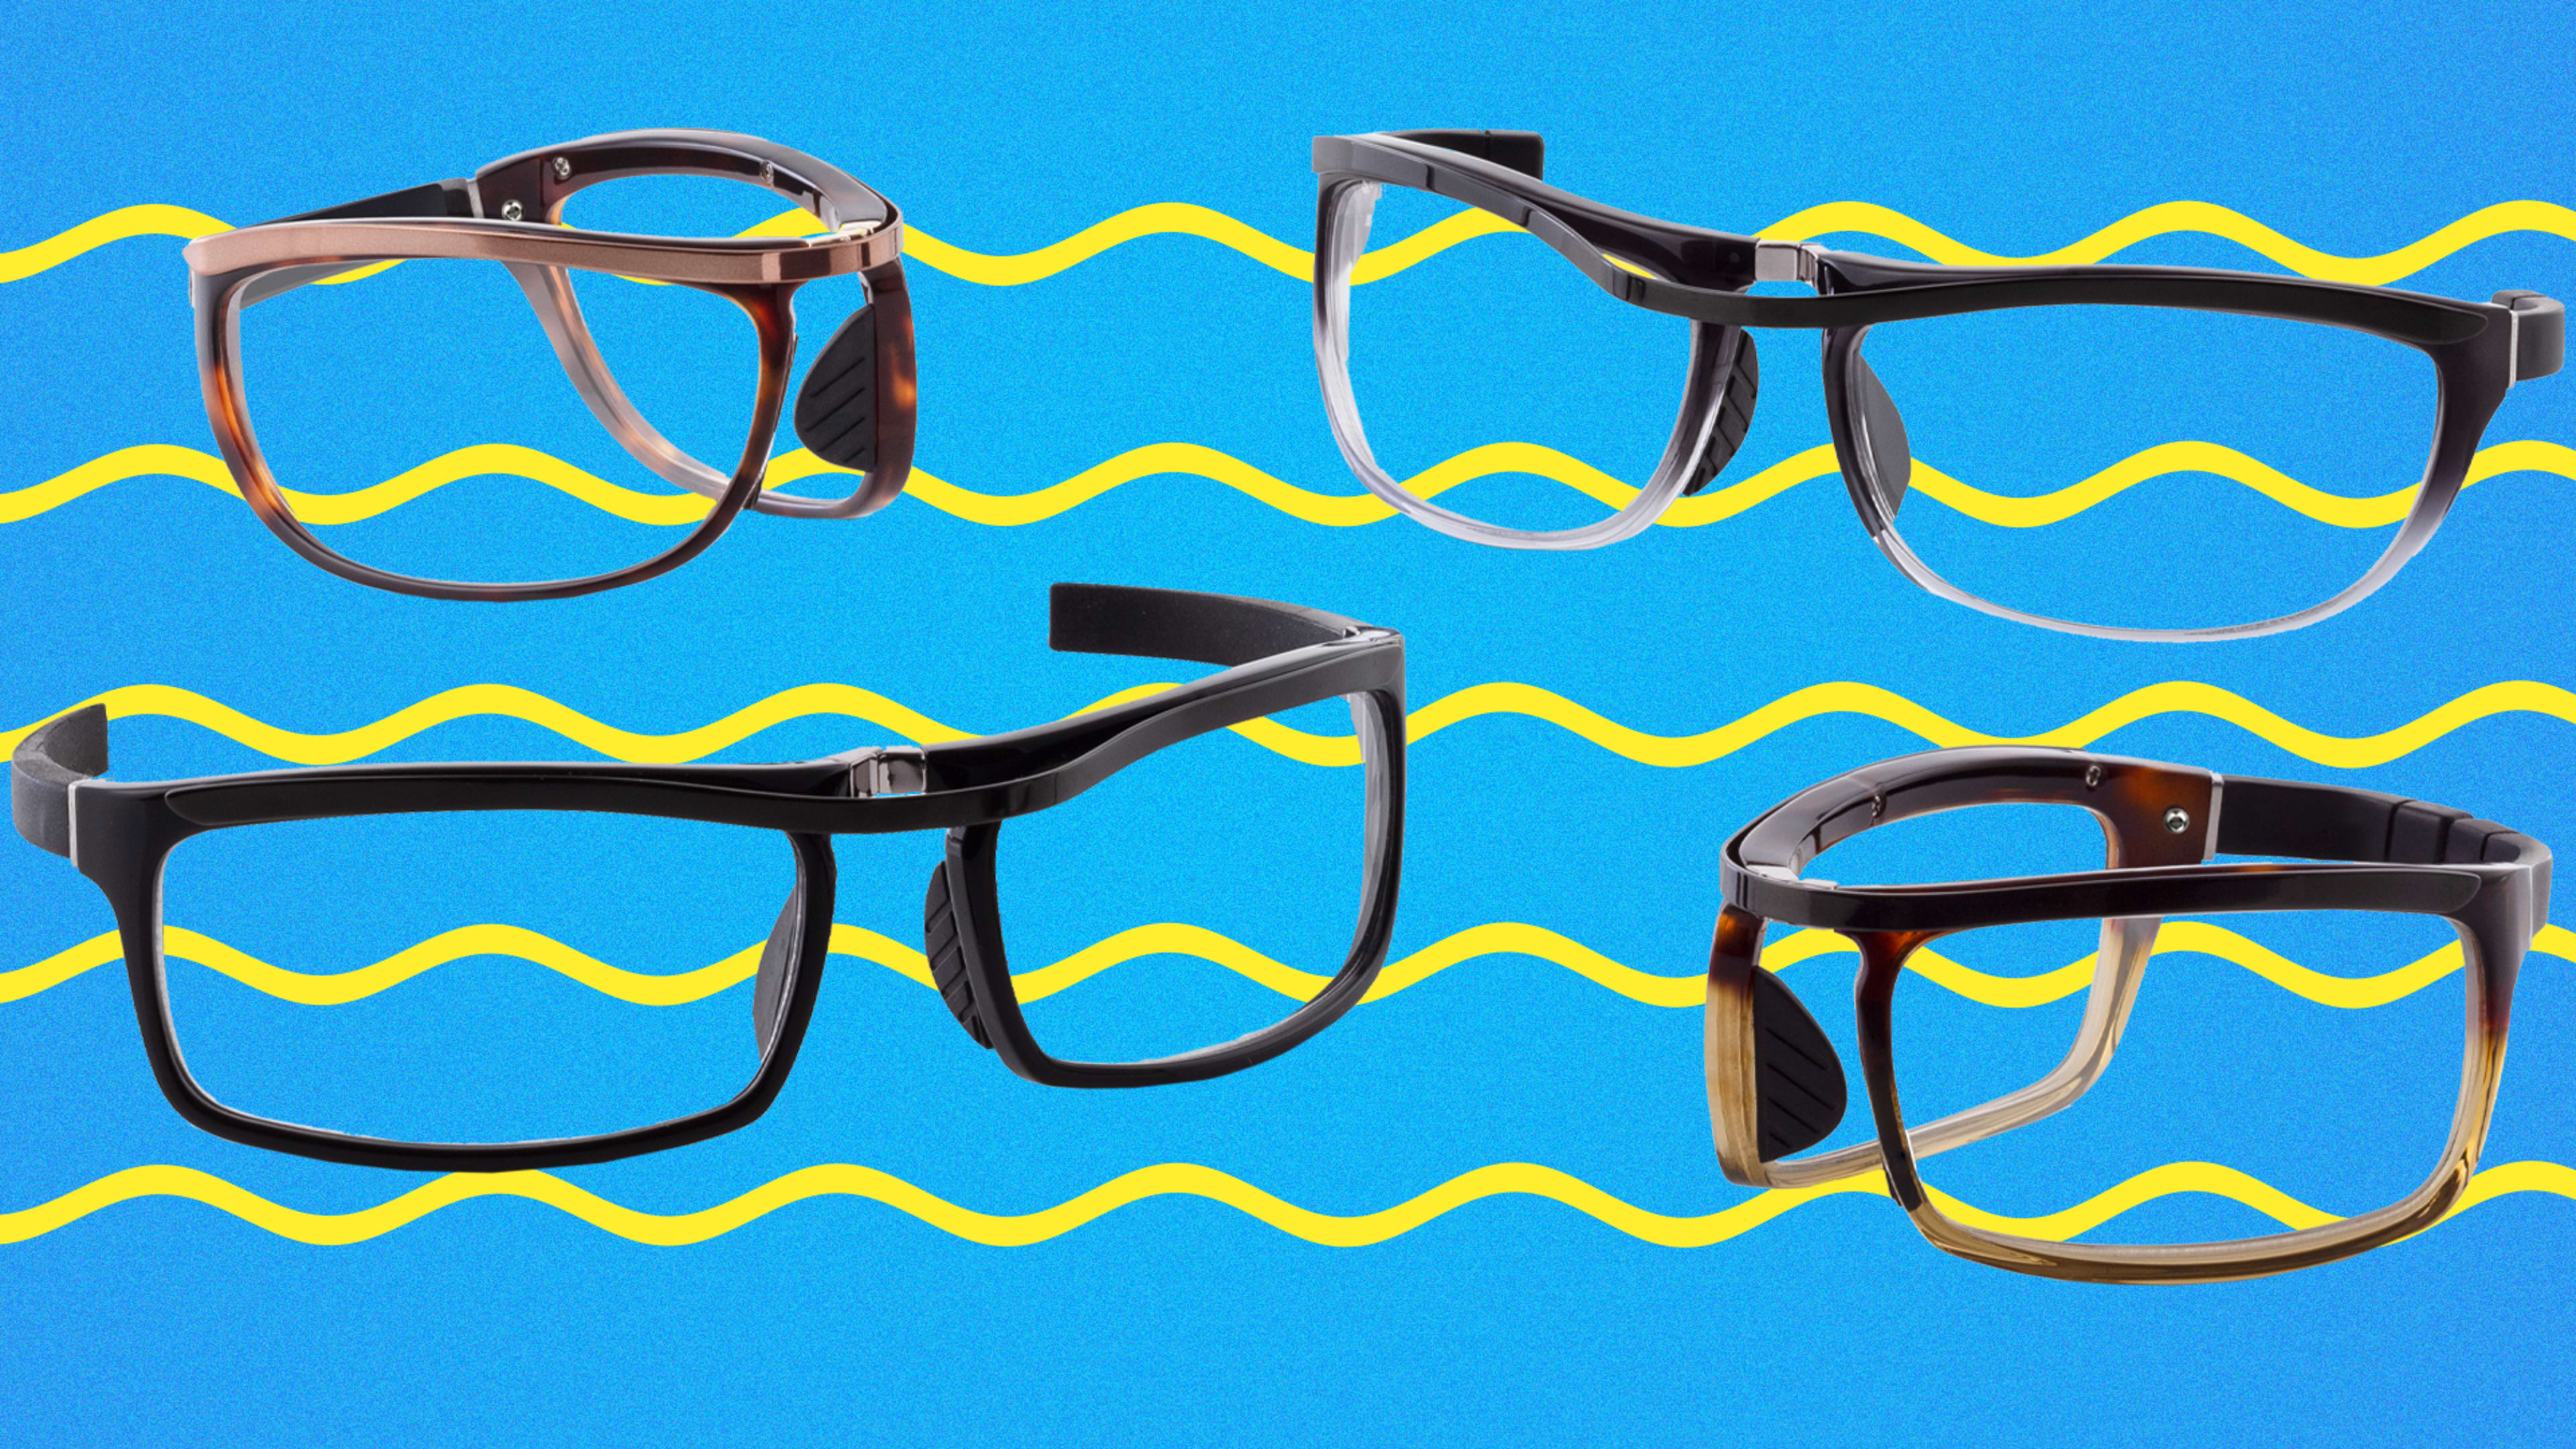 These reading glasses wrap around your wrist so you don’t lose them